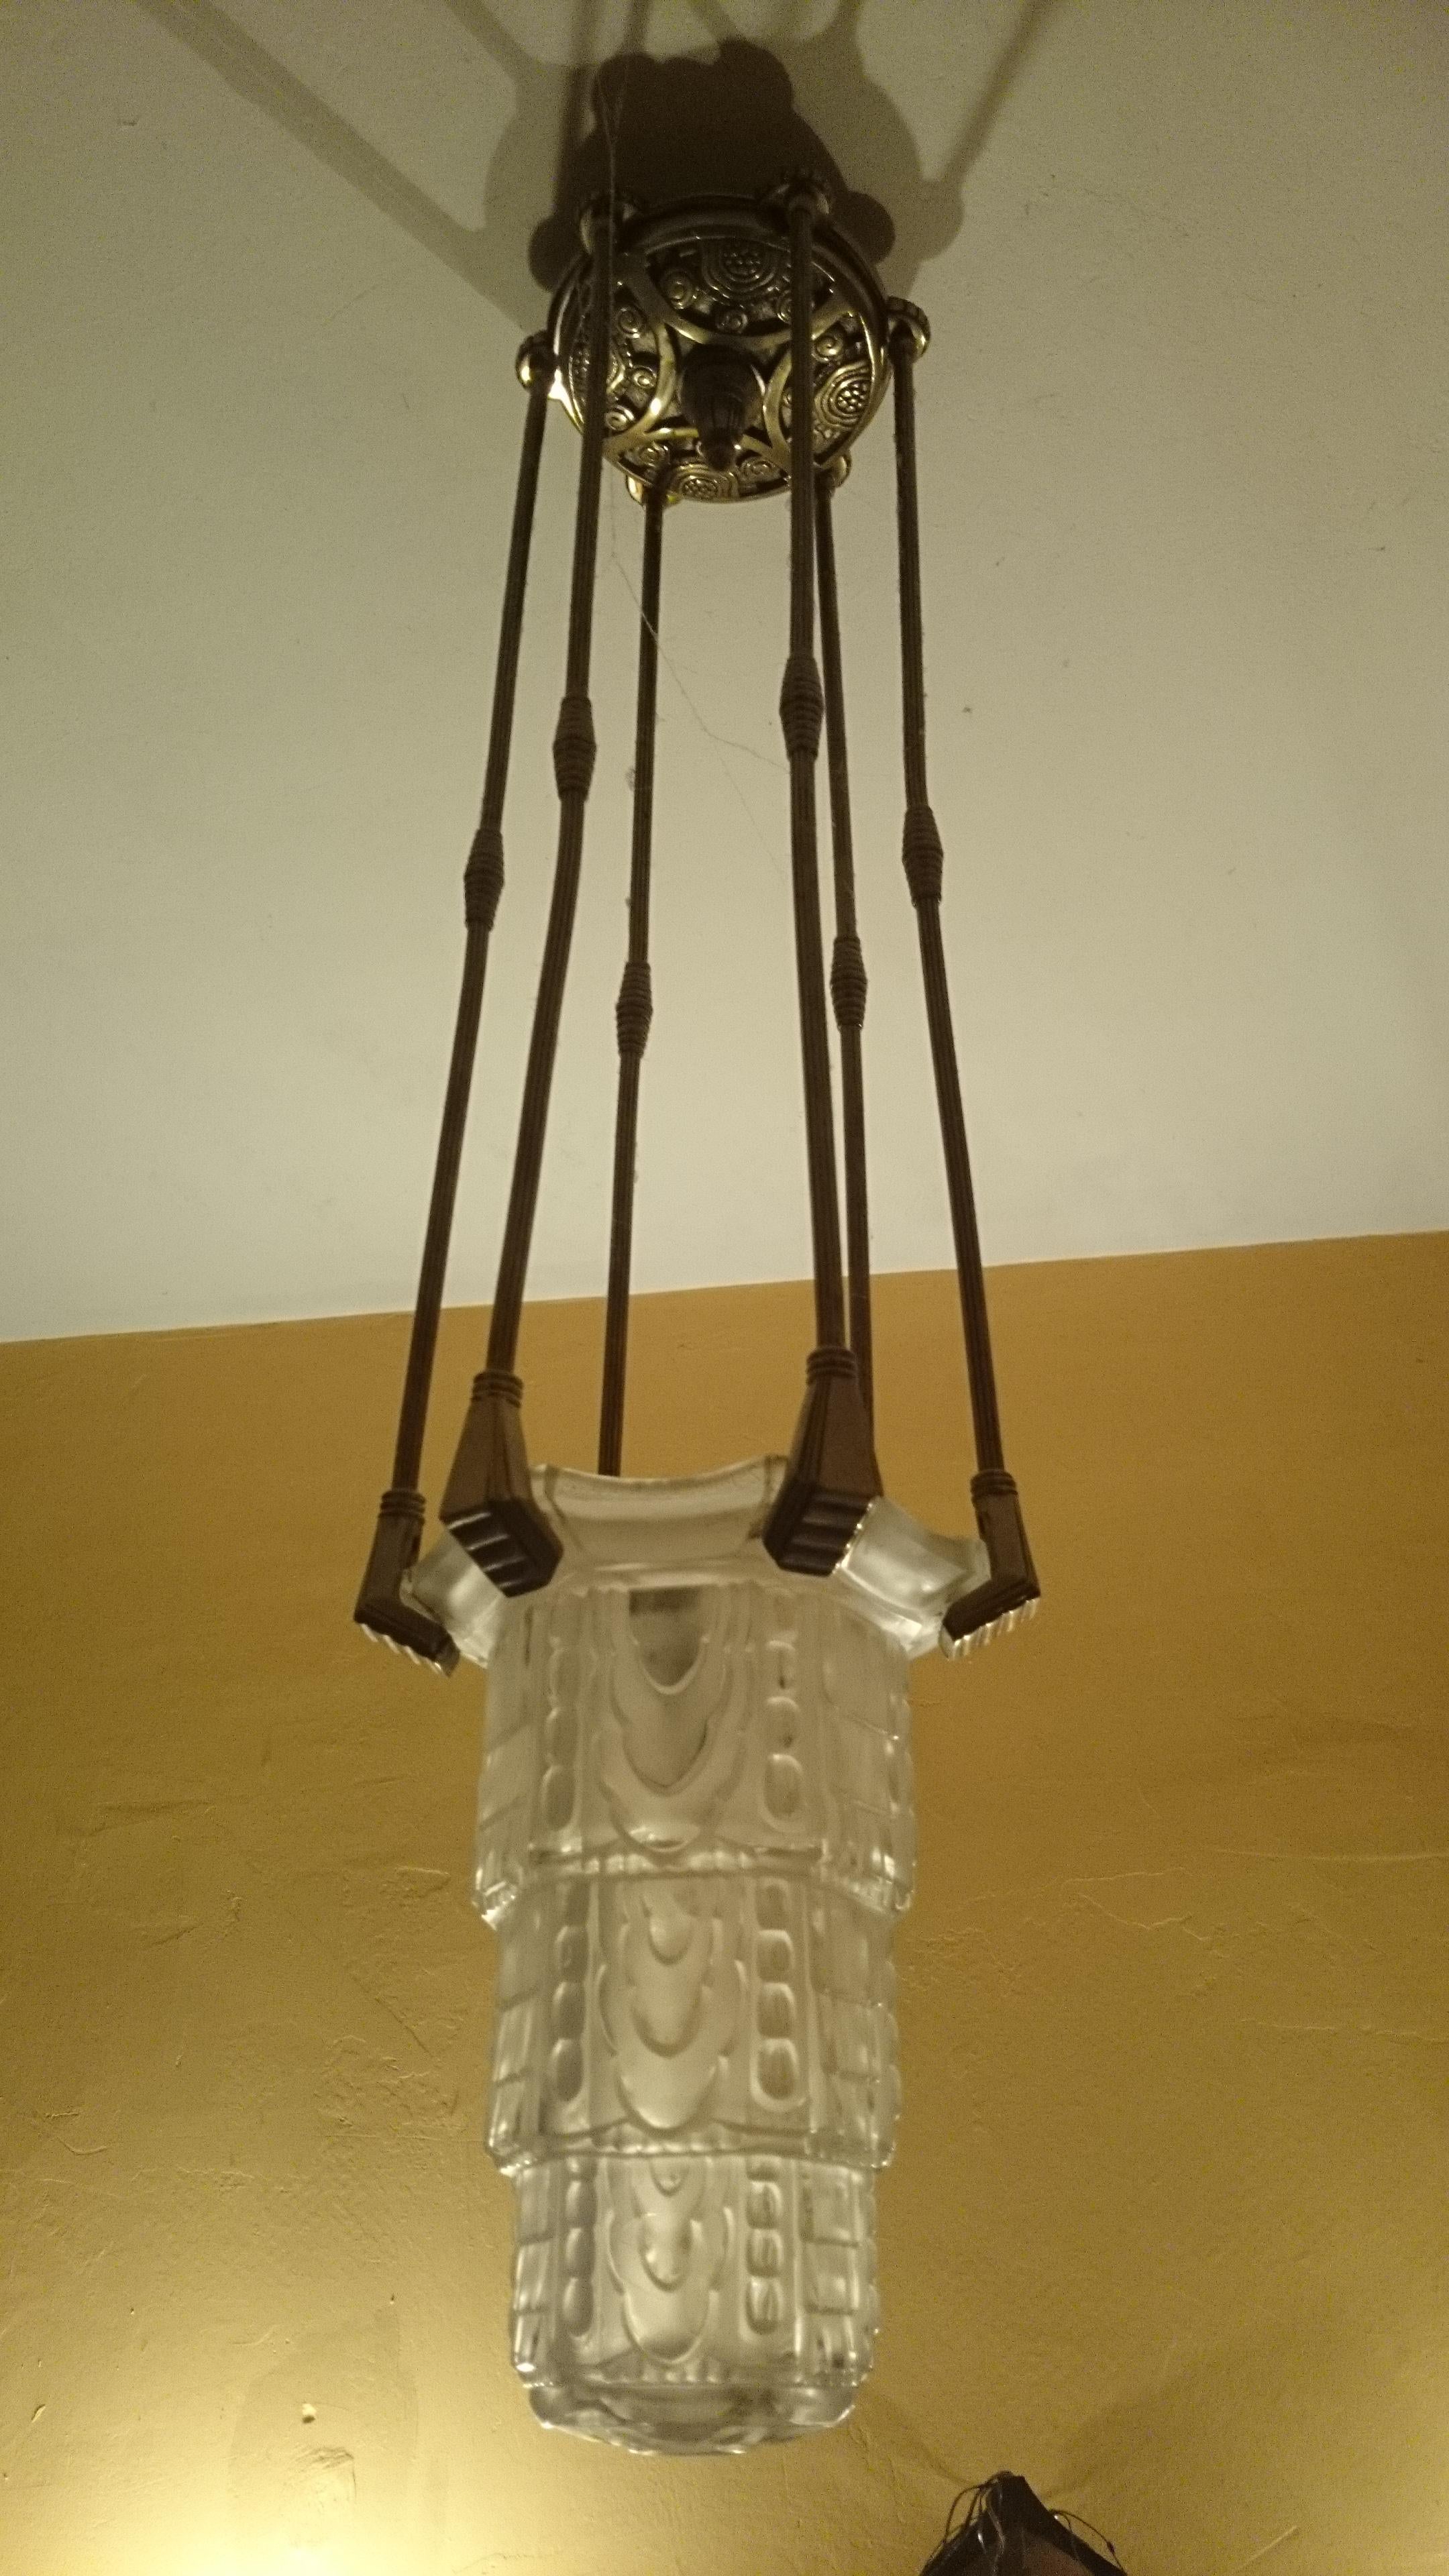 French Art Deco ceiling lamp / lantern by Marius Ernest Sabino. Signed and numbered in the glass. 